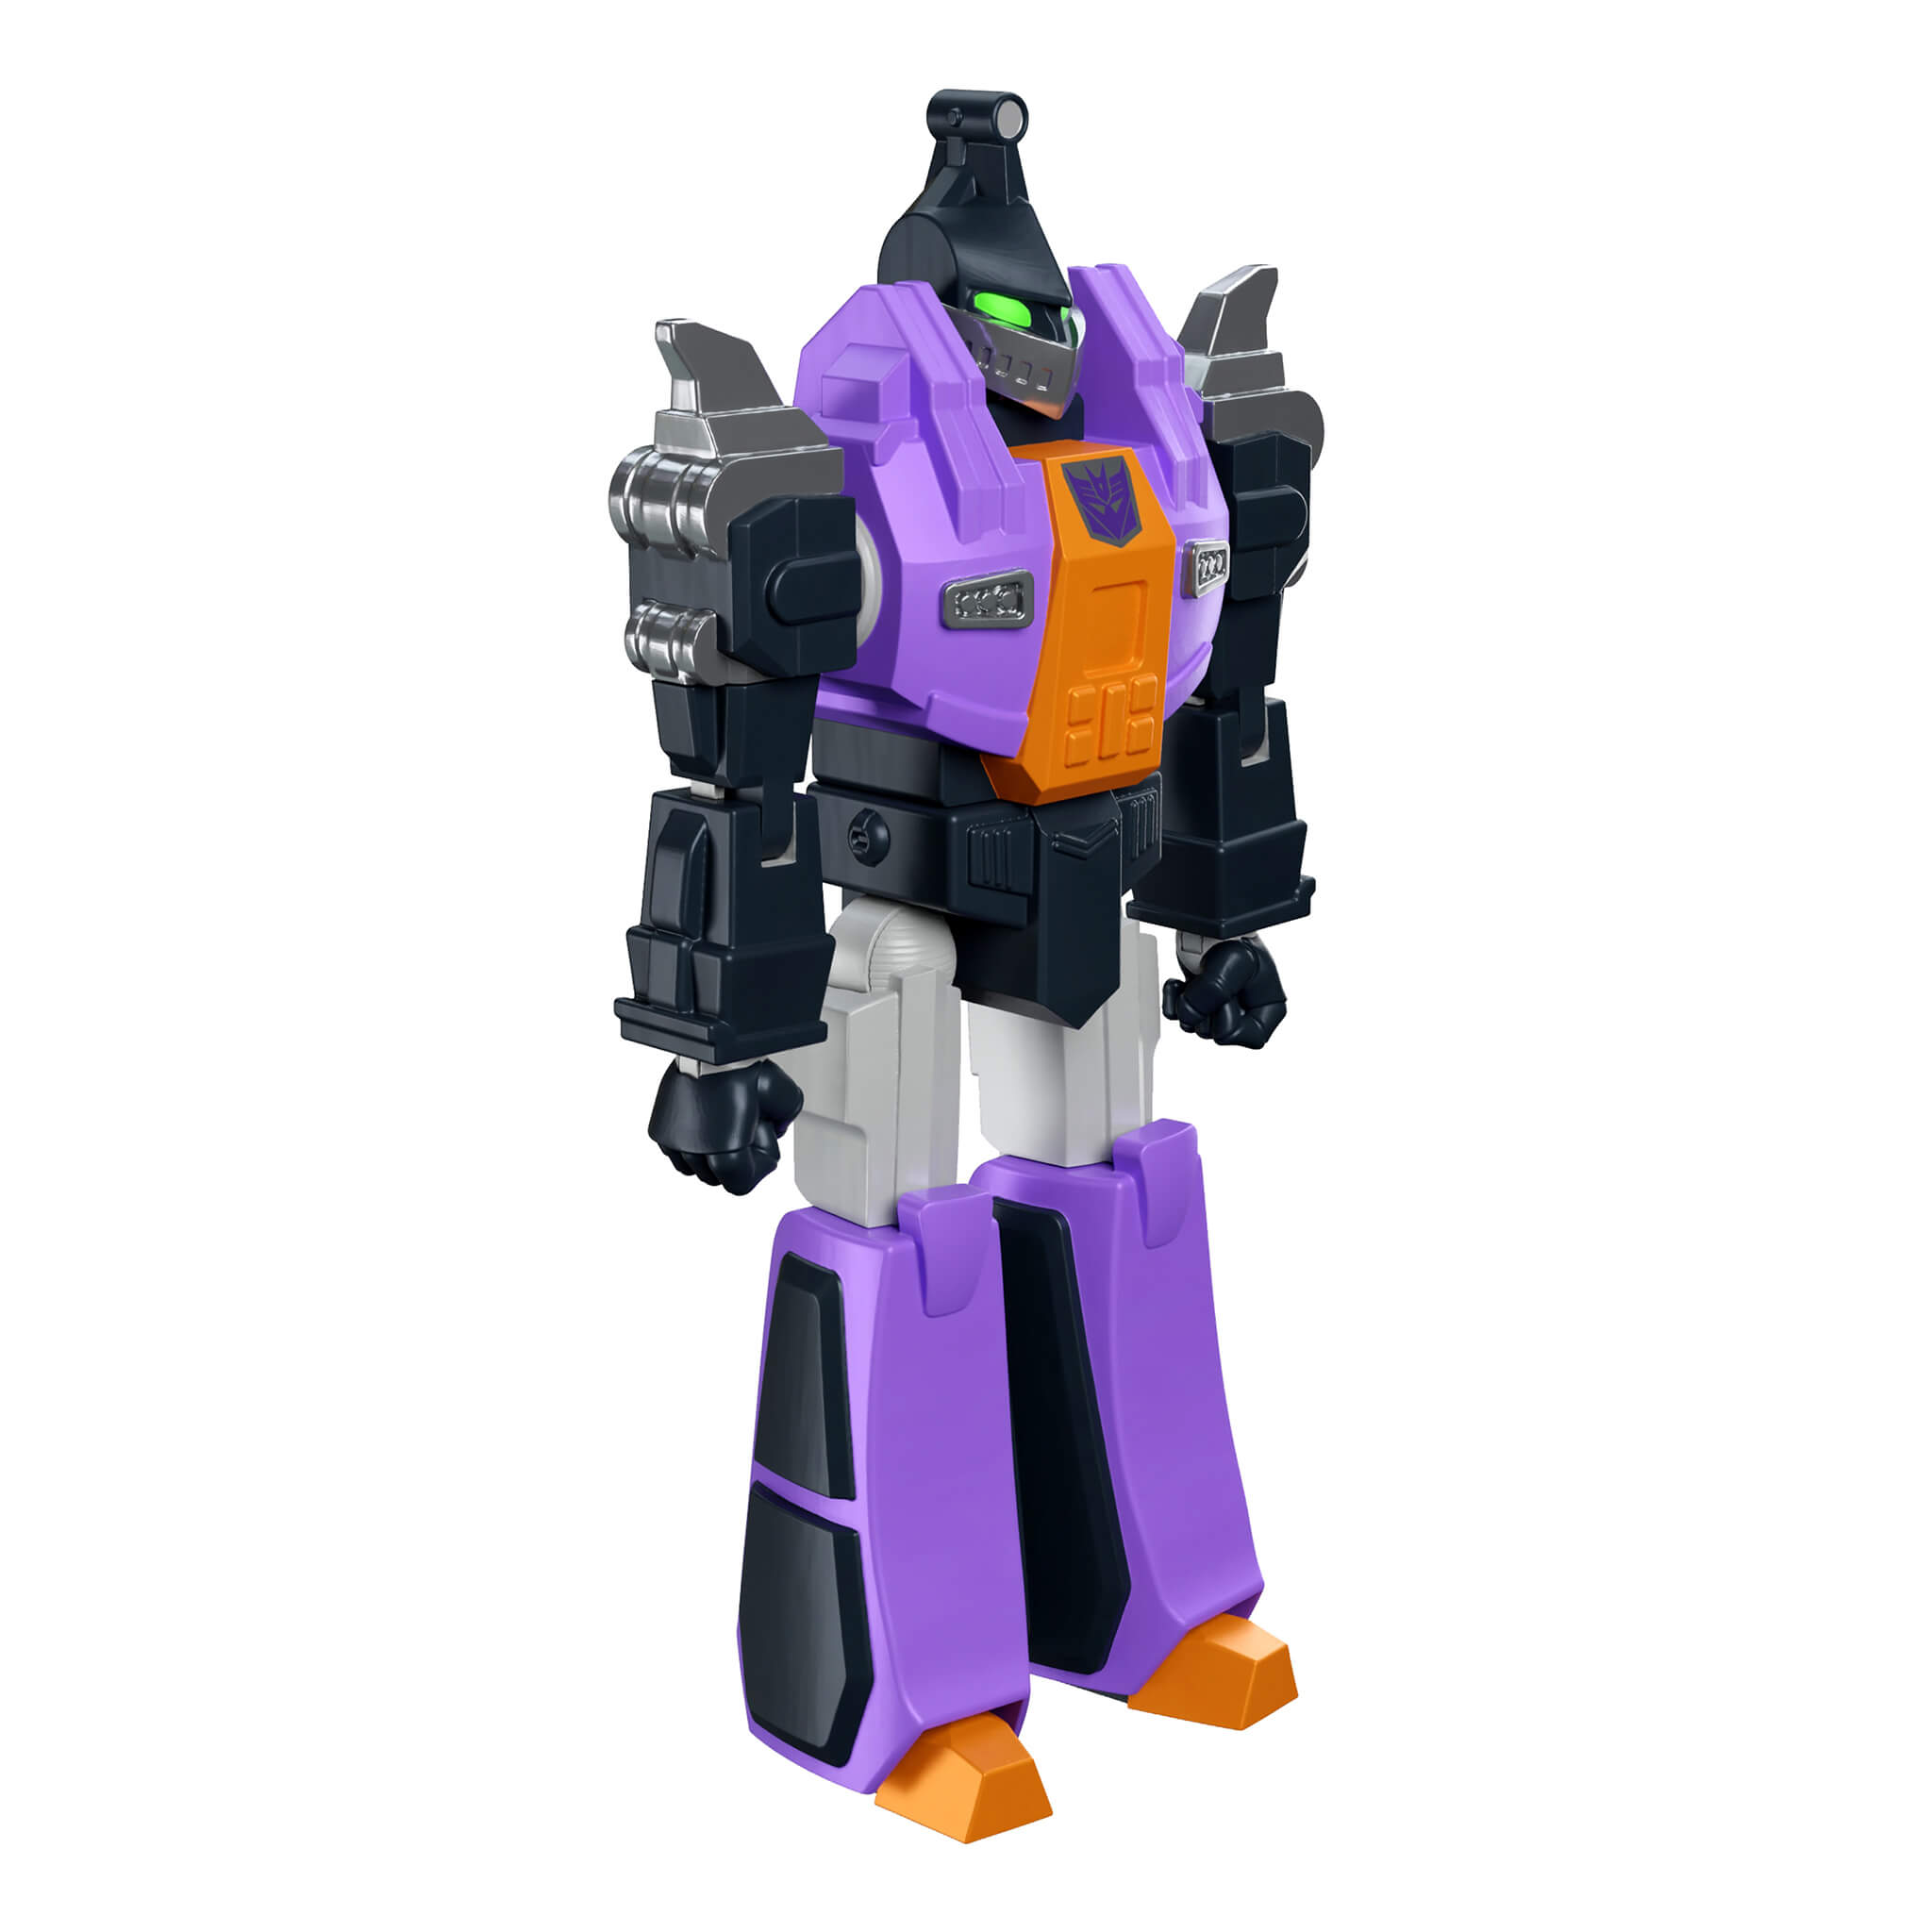 Transformers ULTIMATES! Wave 1 - Bombshell